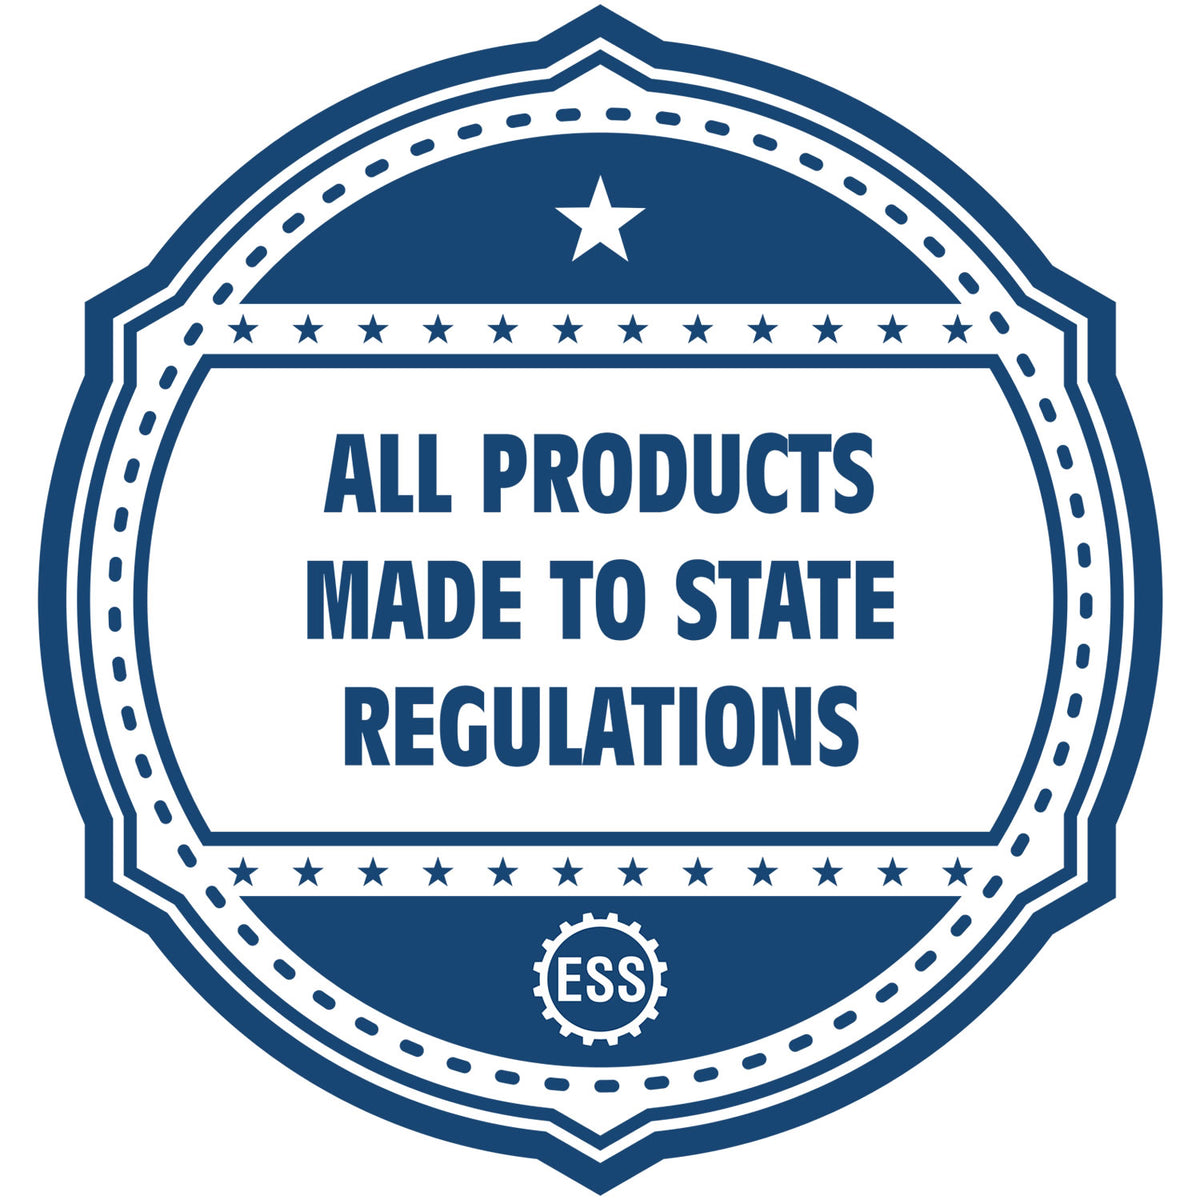 An icon or badge element for the State of Iowa Architectural Seal Embosser showing that this product is made in compliance with state regulations.